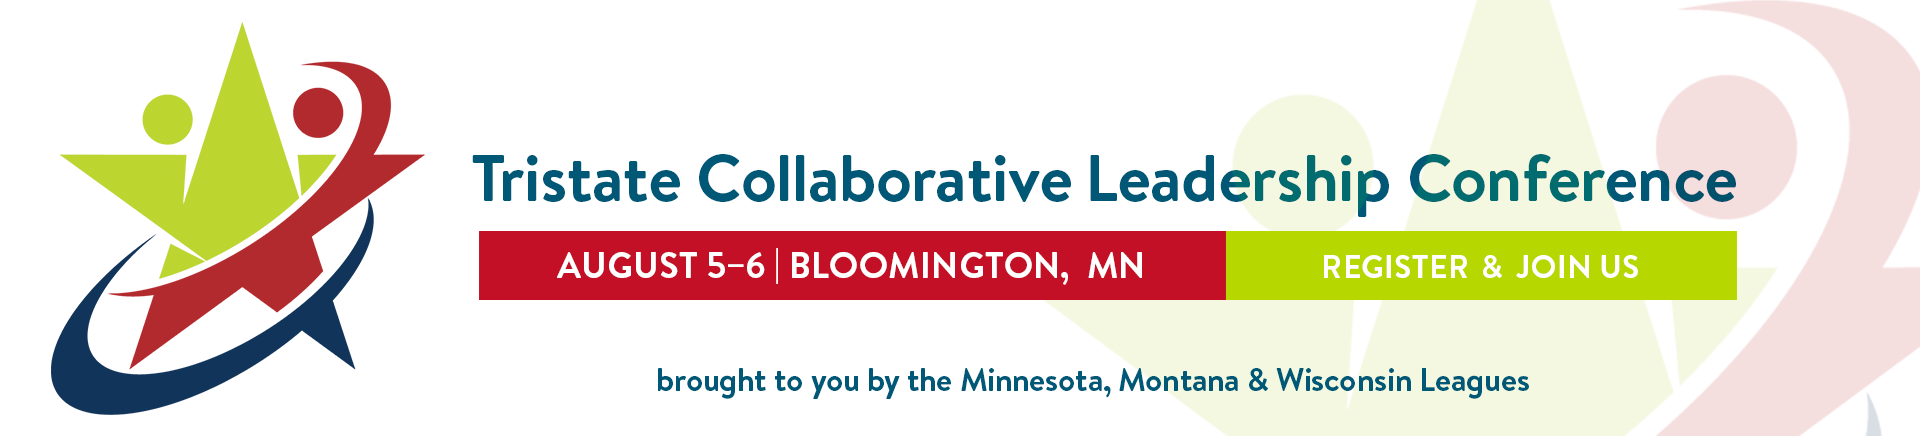 join us August 5-6 in Bloomington, Minnesota for the Tristate Collaborative Leaadership Conference. Click to register.